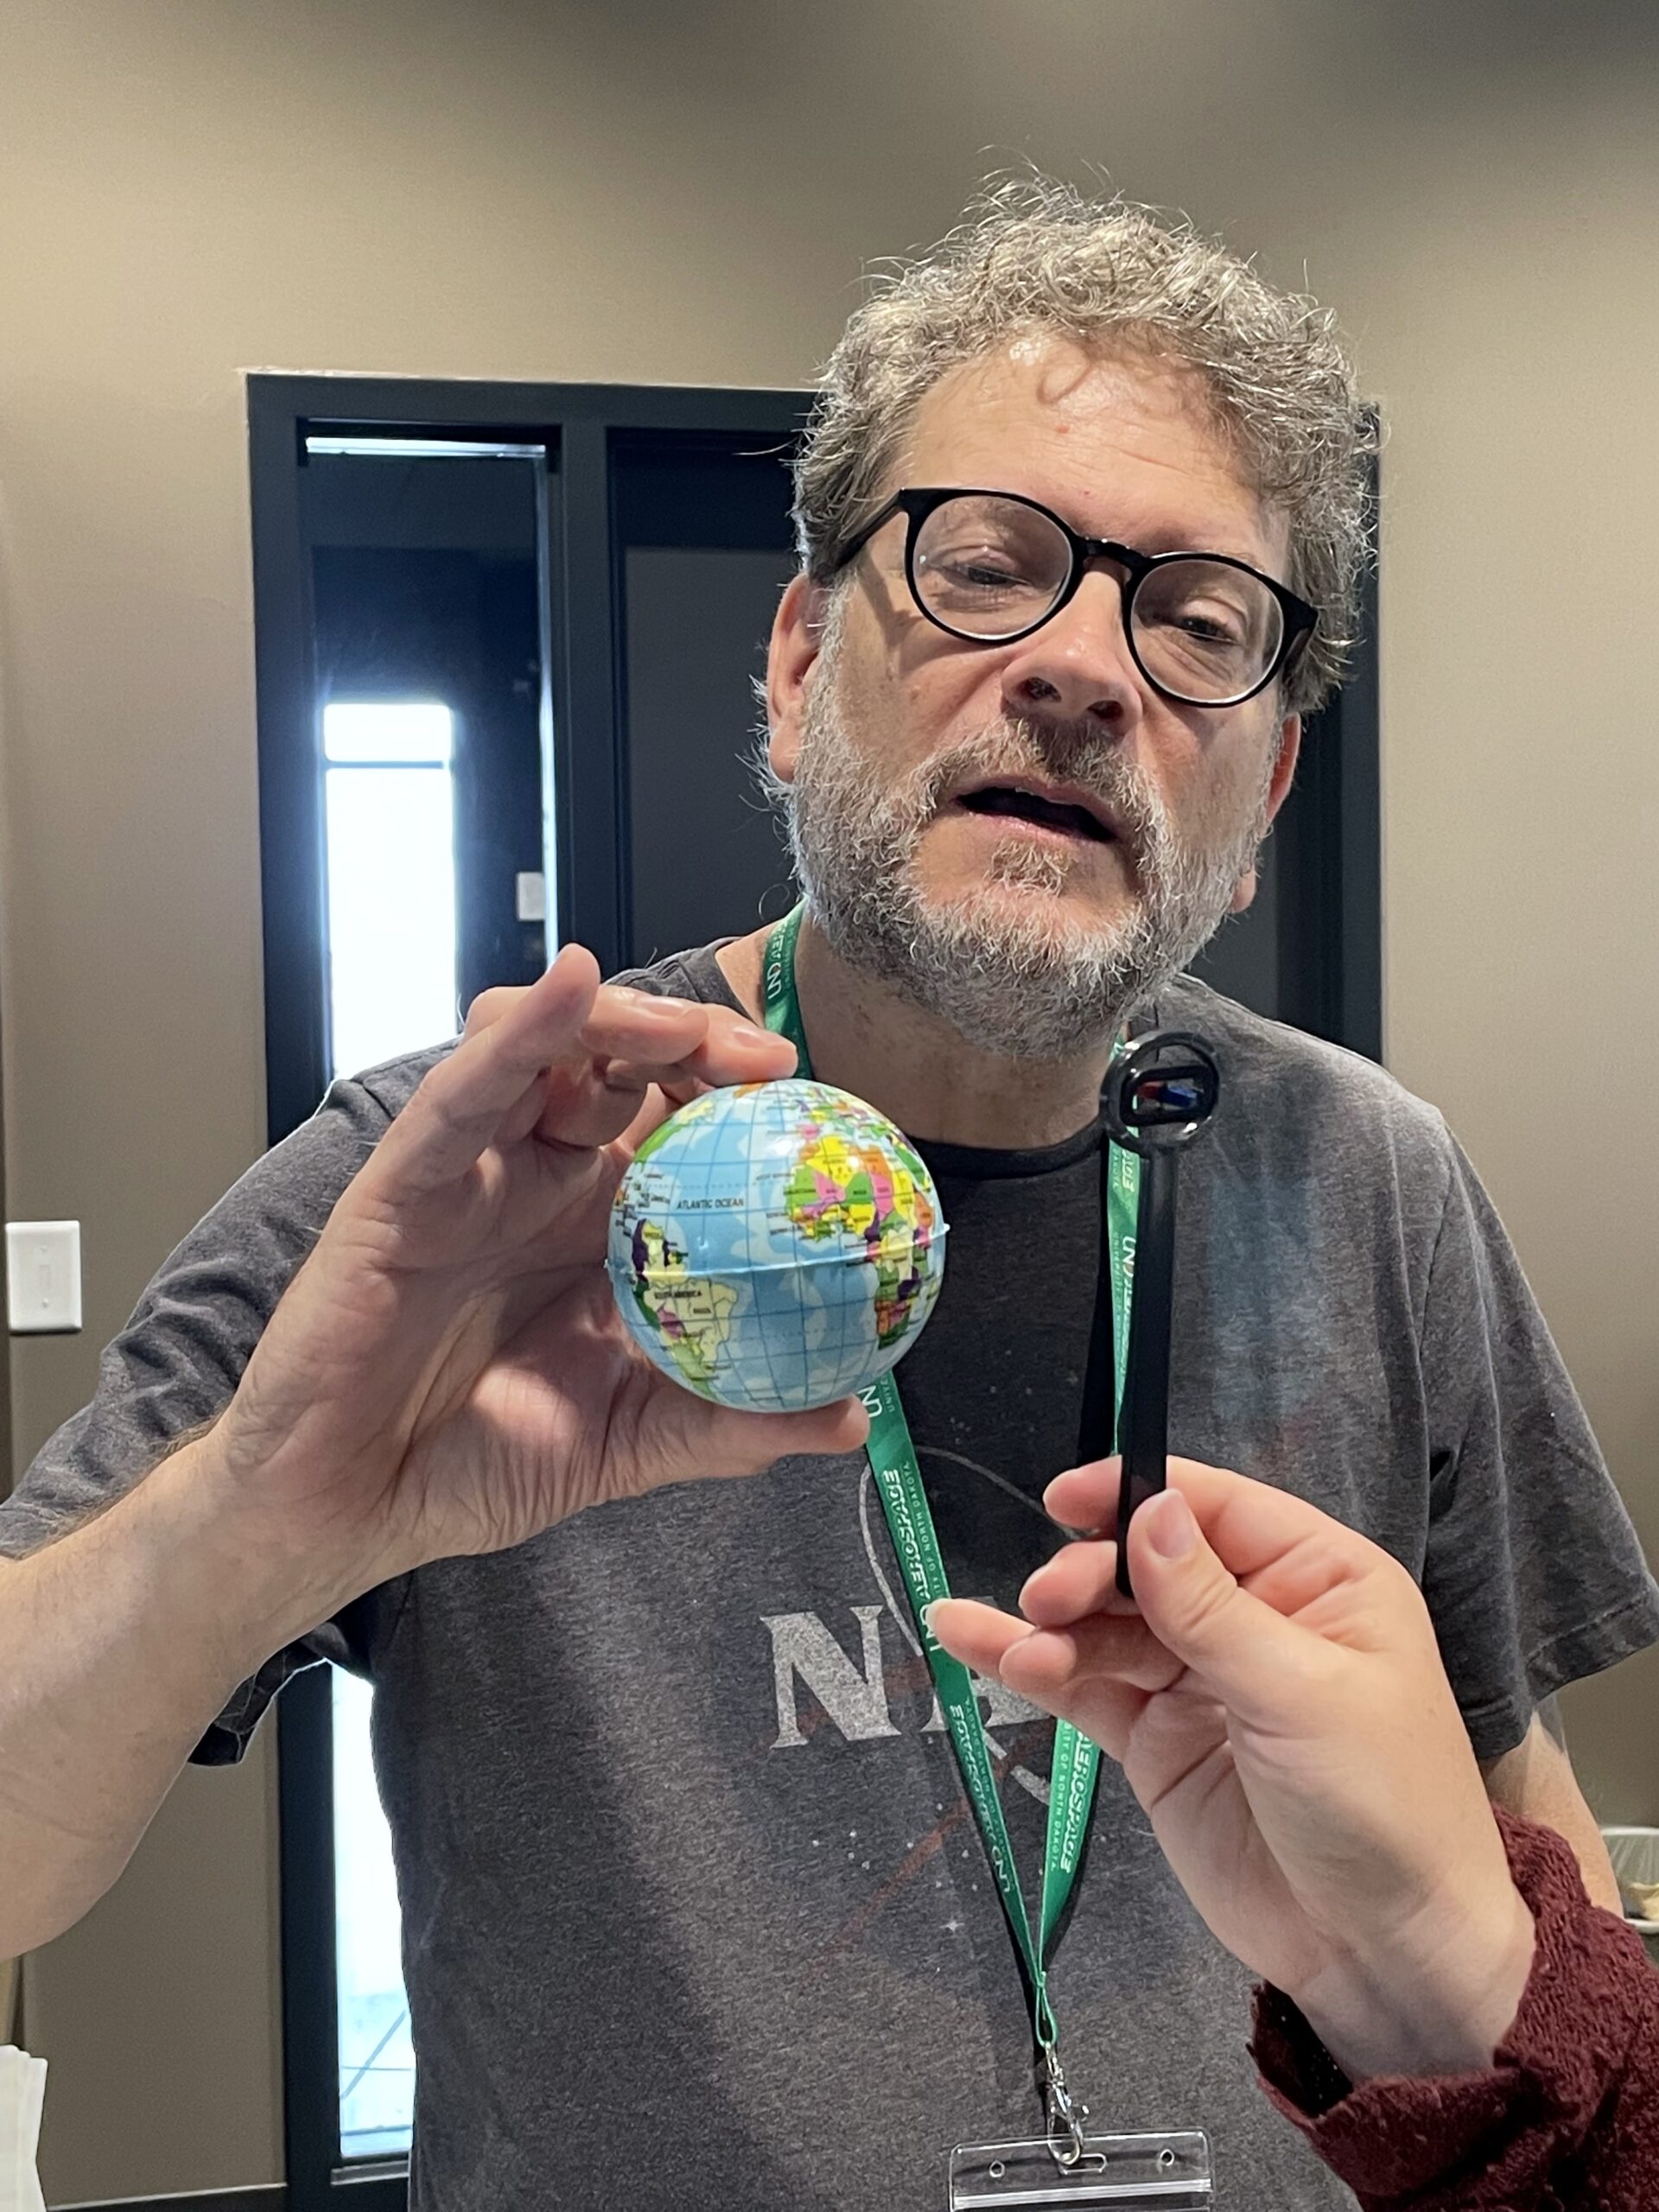 Man holding up a small globe while someone holds a stick up to it.